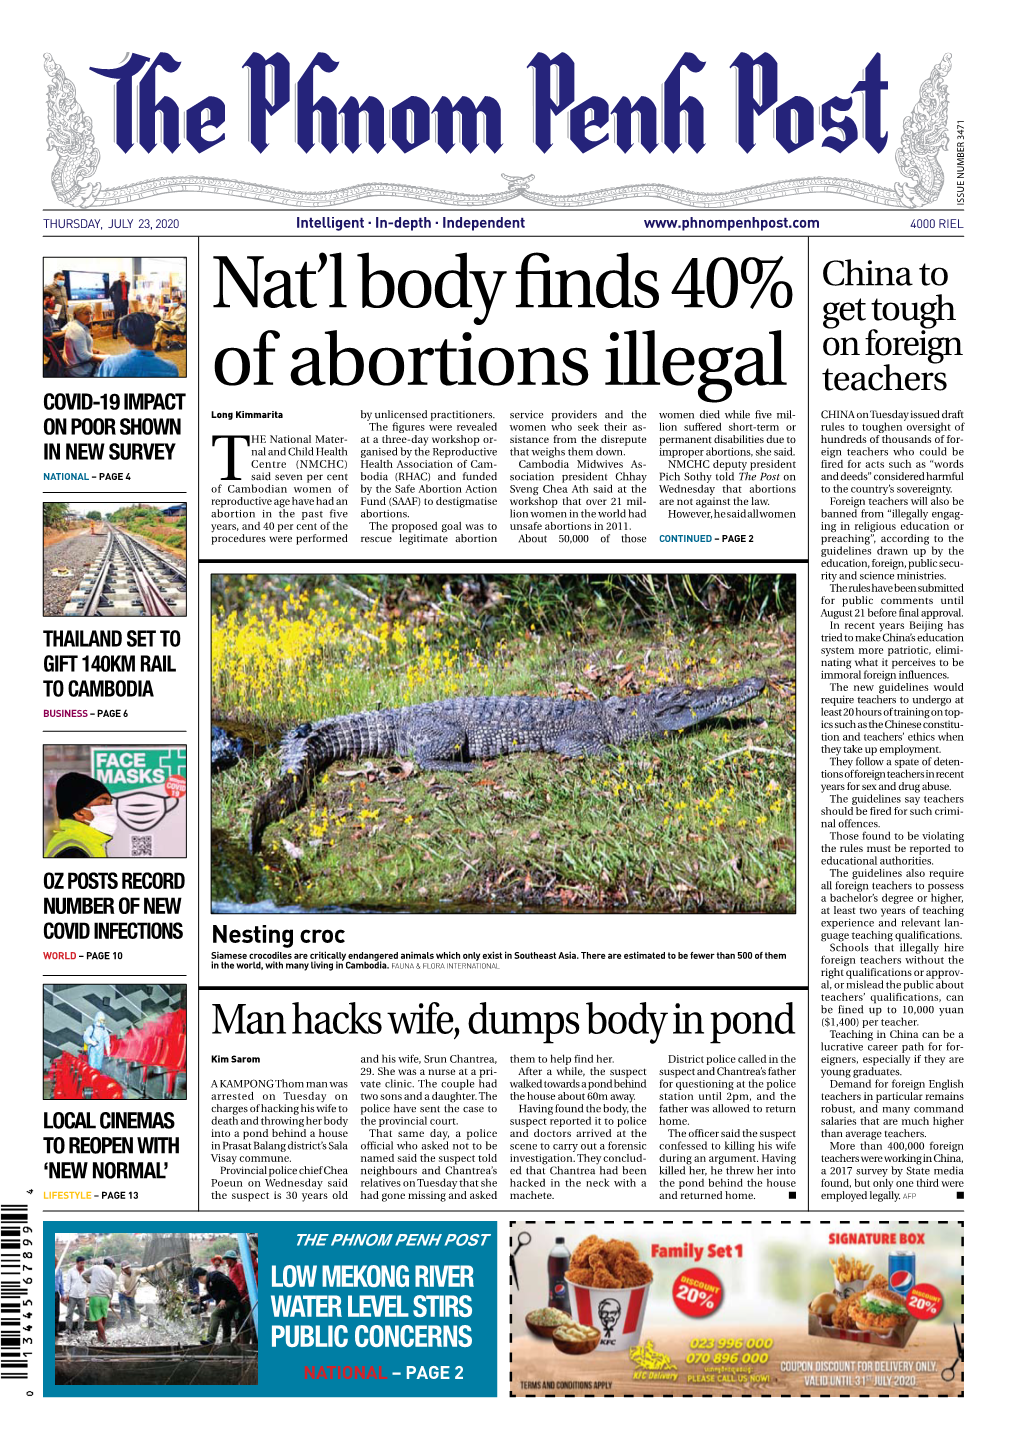 Nat'l Body Finds 40% of Abortions Illegal